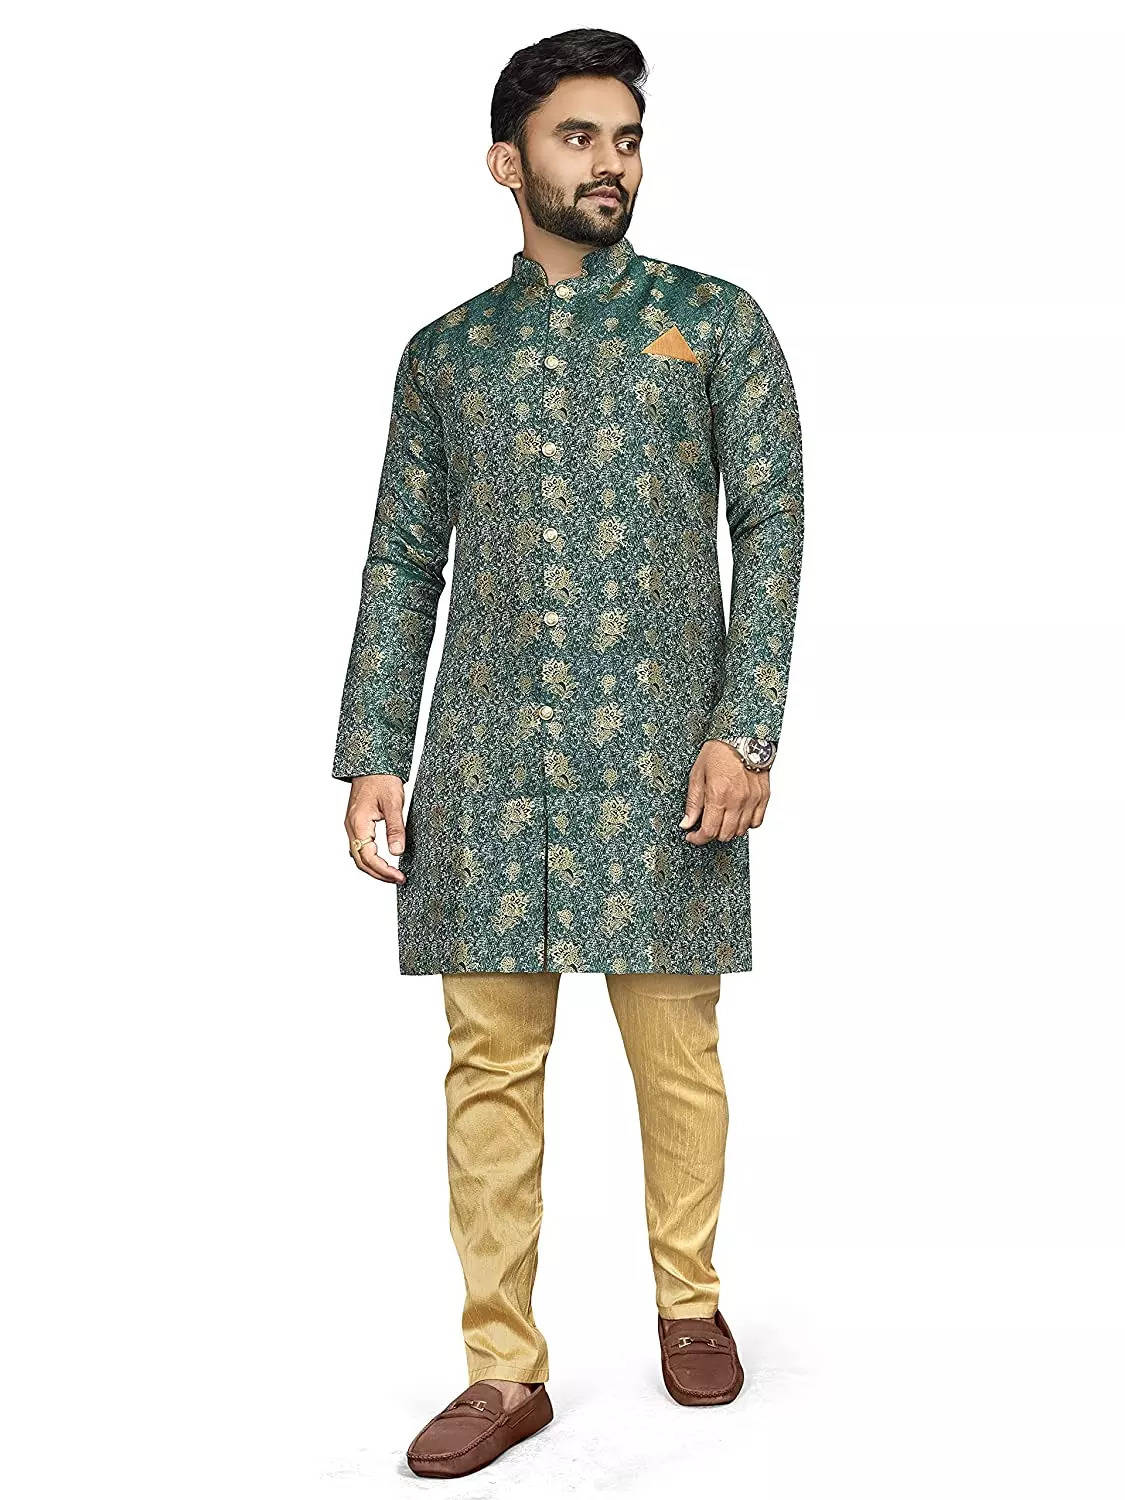 Know about different types of sherwani - Bharat Reshma